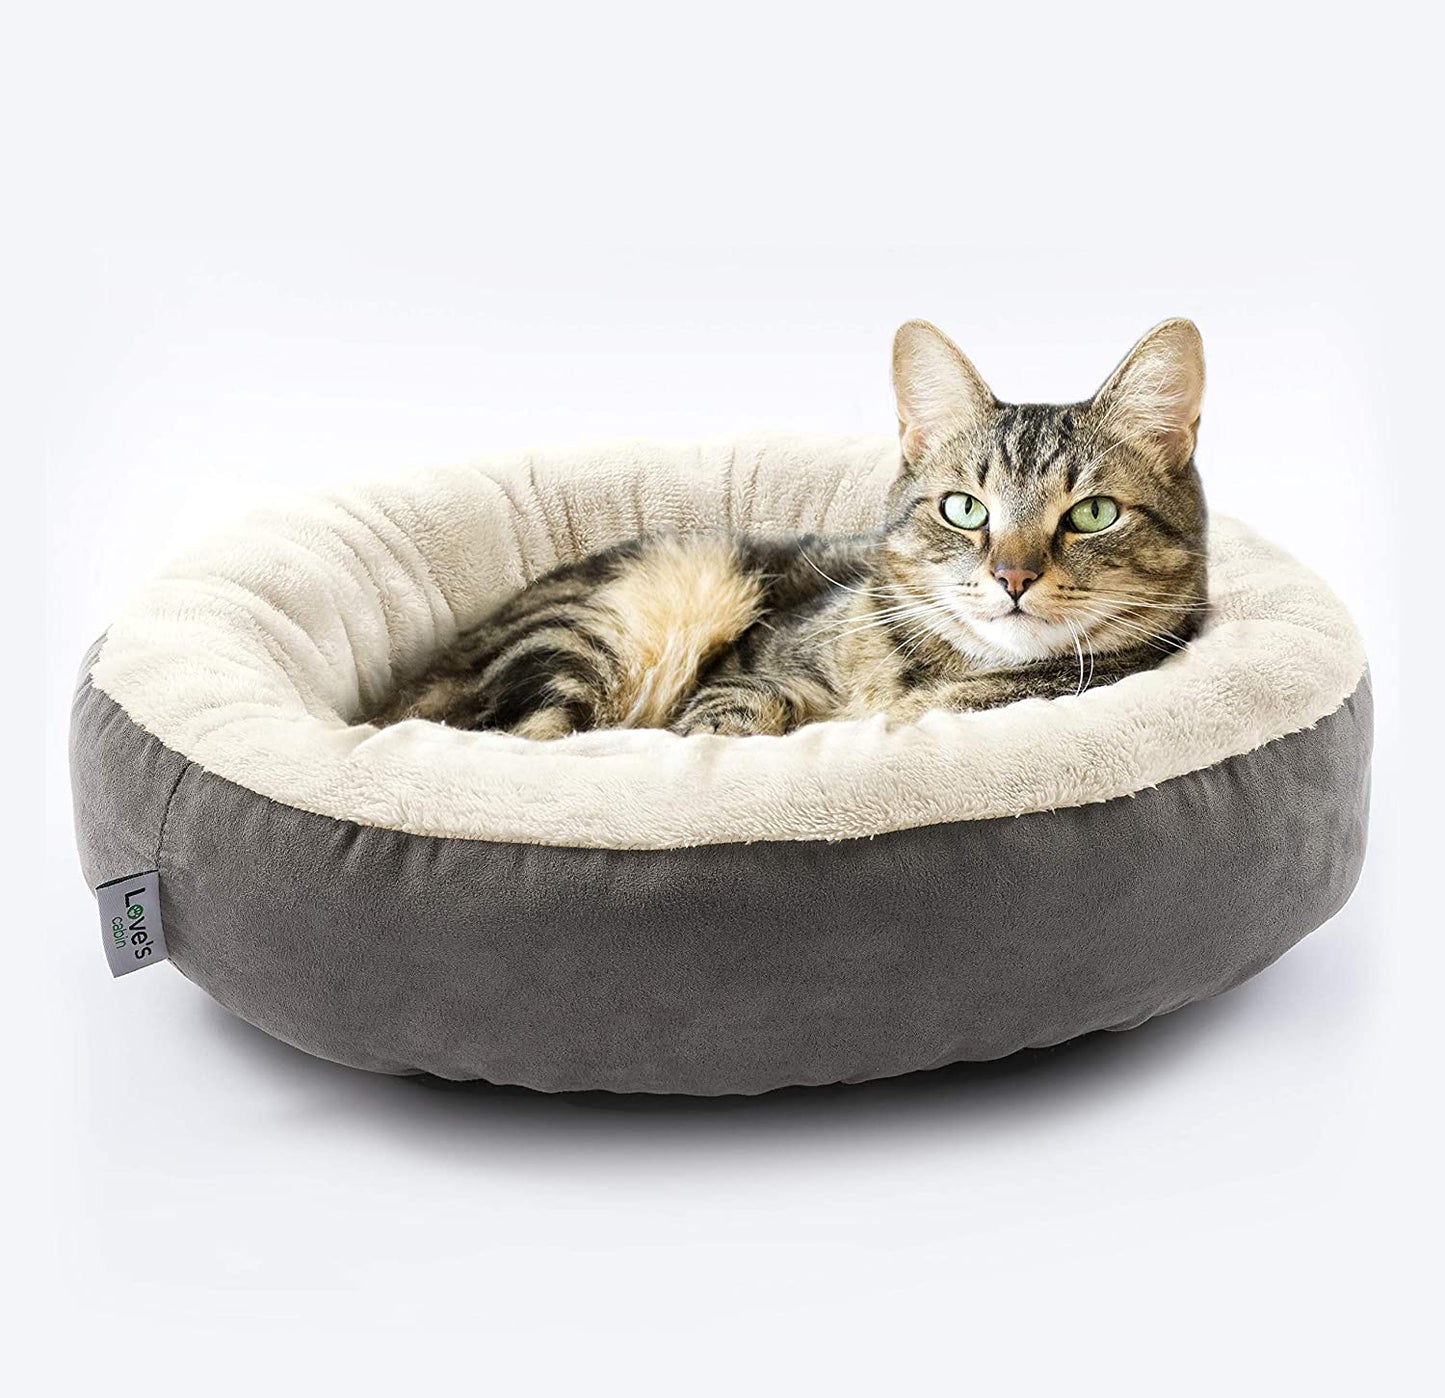 round Donut Cat and Small Dog Cushion Bed, 20In, Anti-Slip & Water-Resistant Bottom, Super Soft Durable Fabric, Washable Luxury Bed Gray